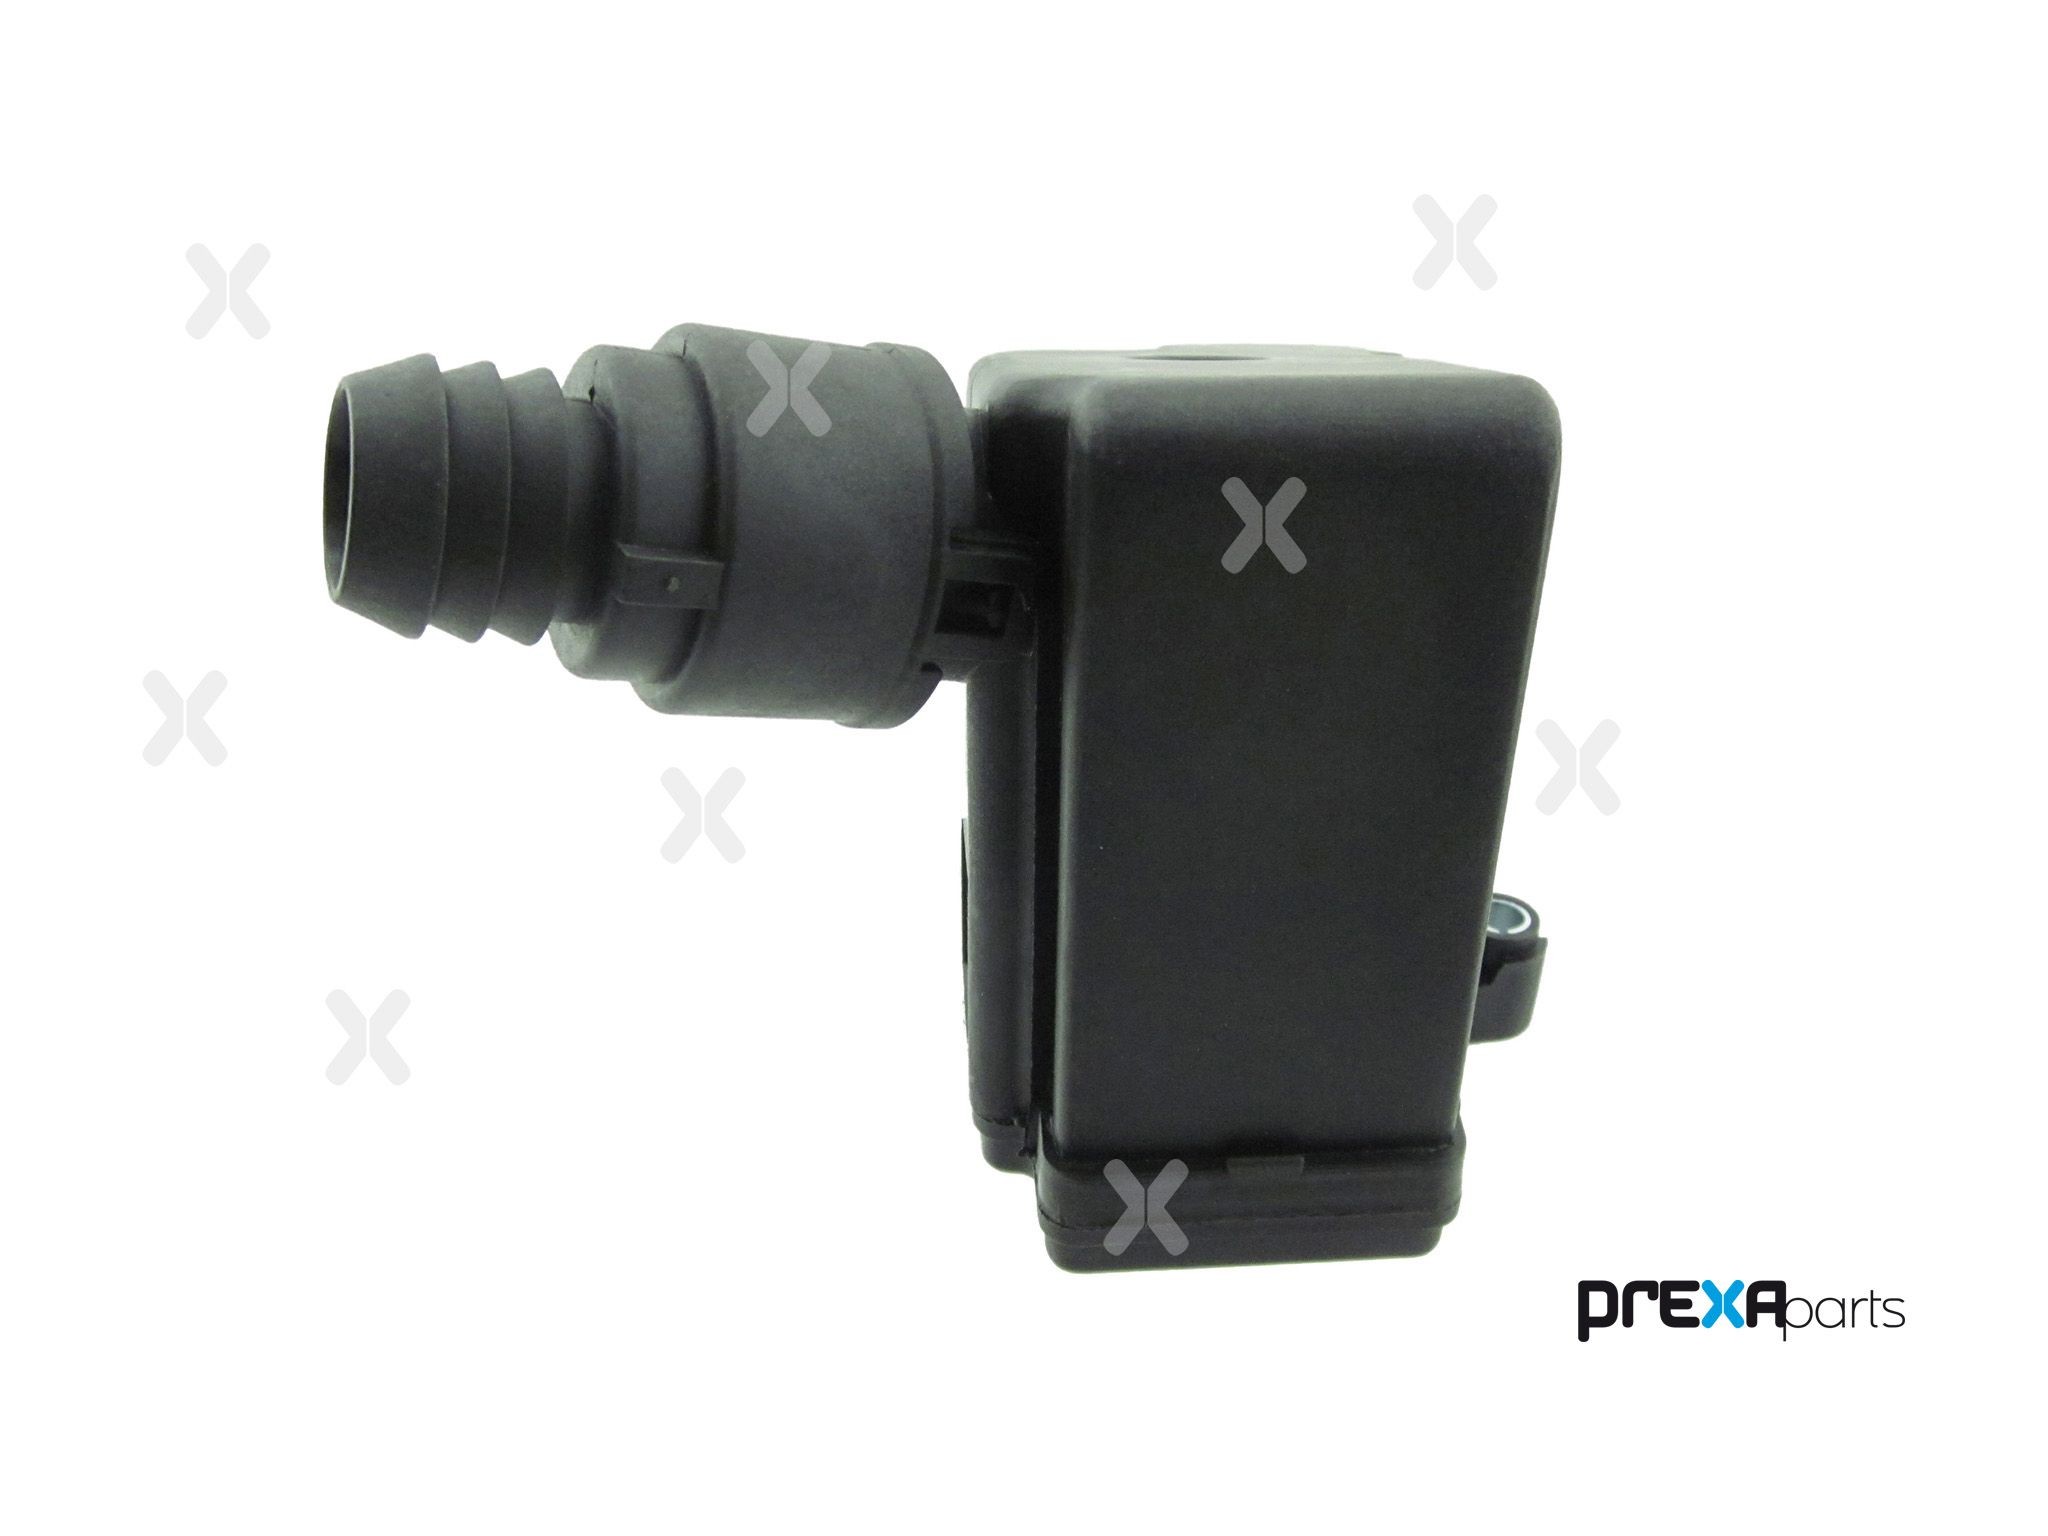 P304043 Sensor, exhaust gas temperature PREXAparts P304043 review and test